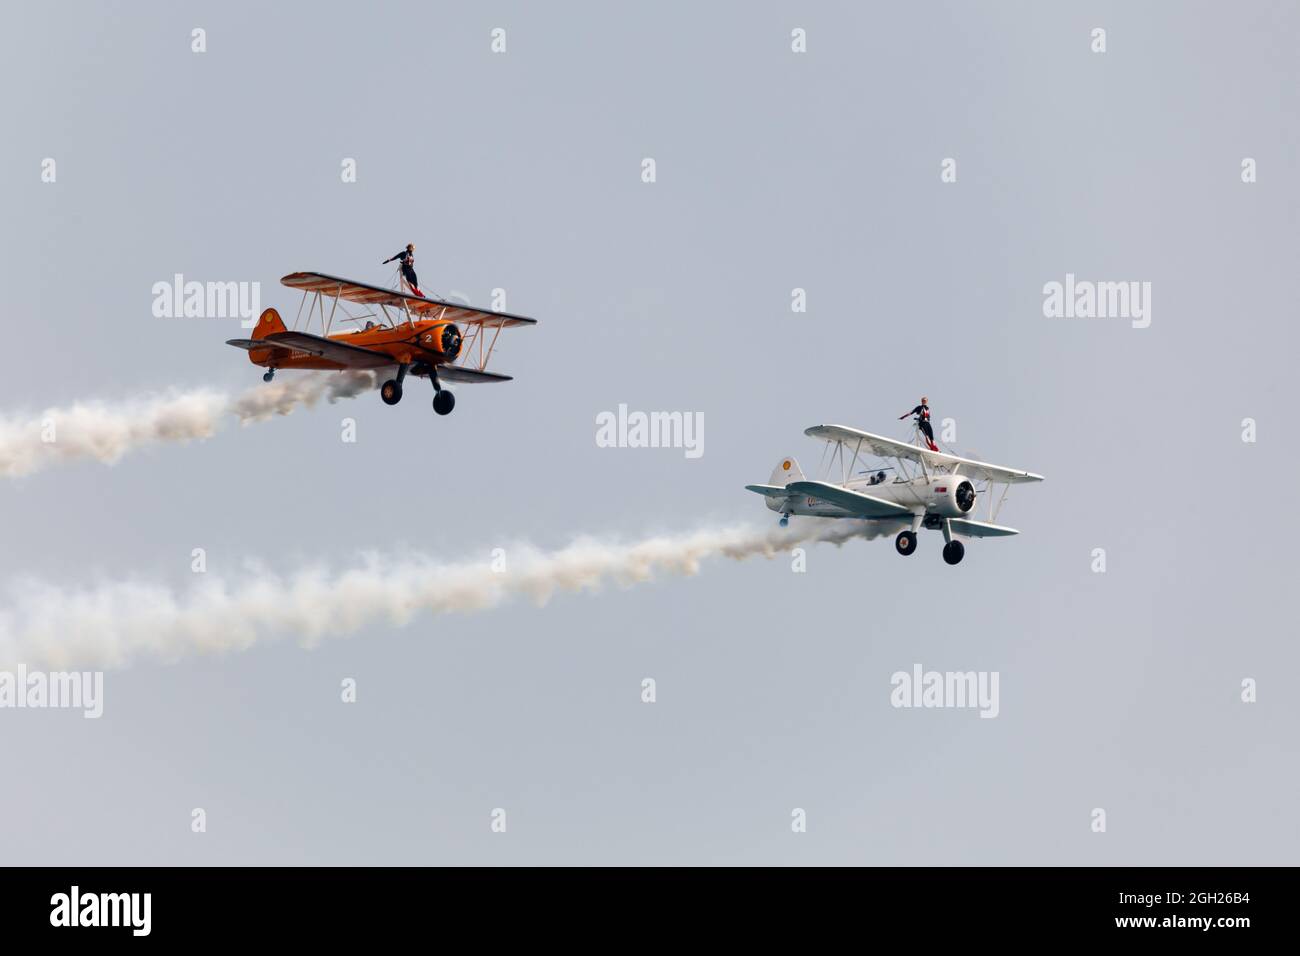 Bournemouth, UK. 4th Sep 2021. Wingwalkers perform at Bournemouth Air Festival shortly before cutting short their routine due to technical difficulties.  The white biplane was later reported to have crashed into the sea. Credit: Ed Brown/Alamy Live News Stock Photo